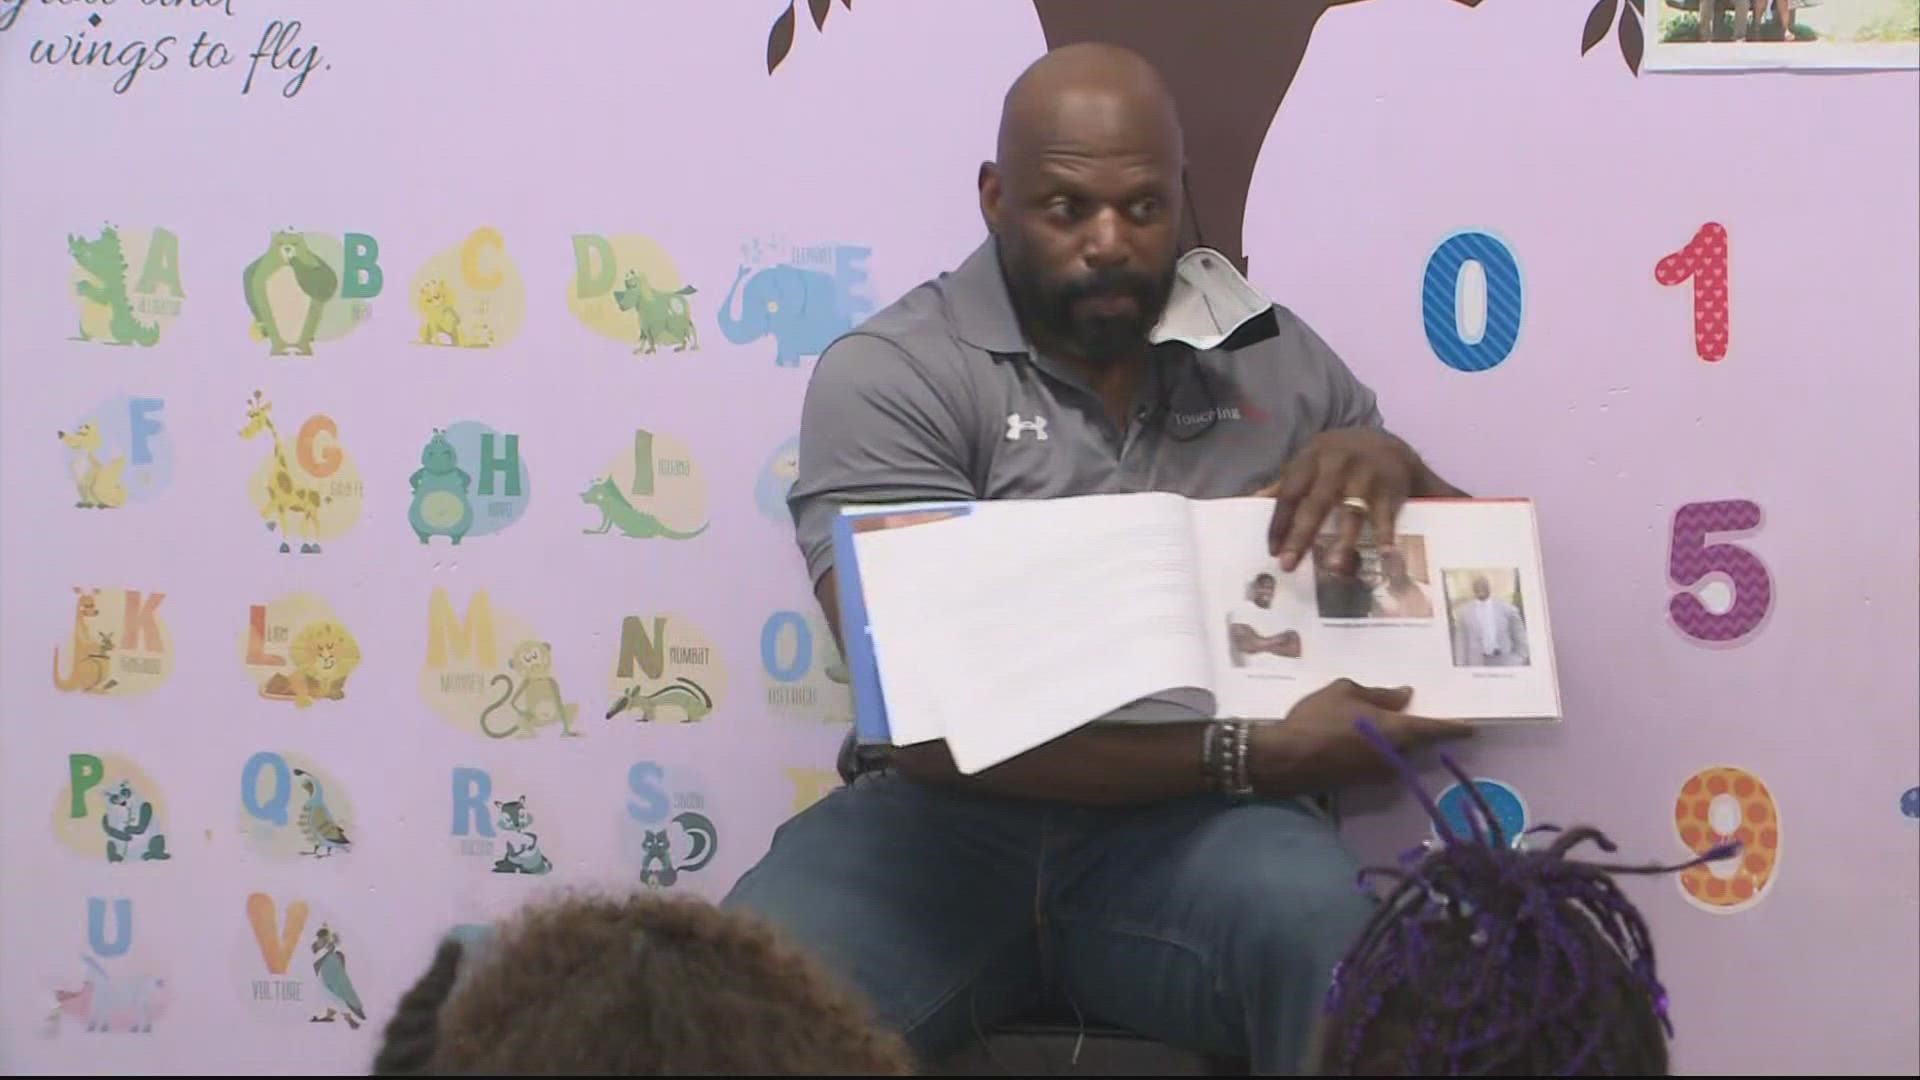 He was a linebacker for the team now called the Washington Commanders. He was recently in Virginia reading books to children.